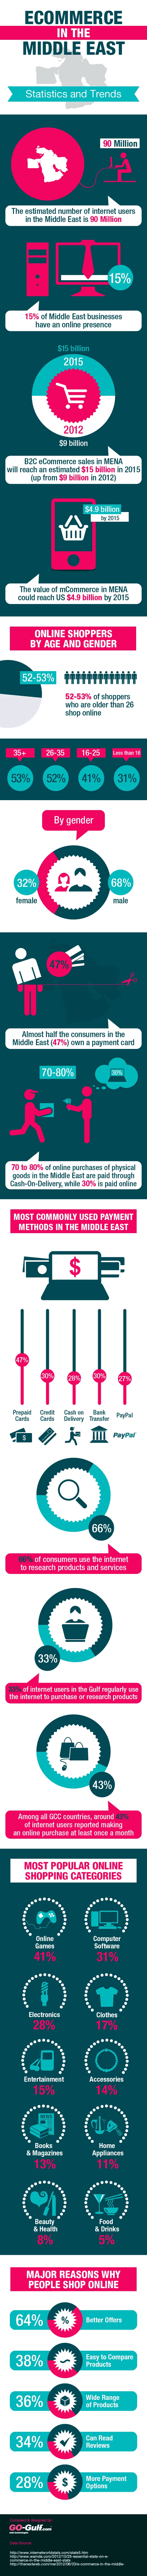 E-commerce in Middle East